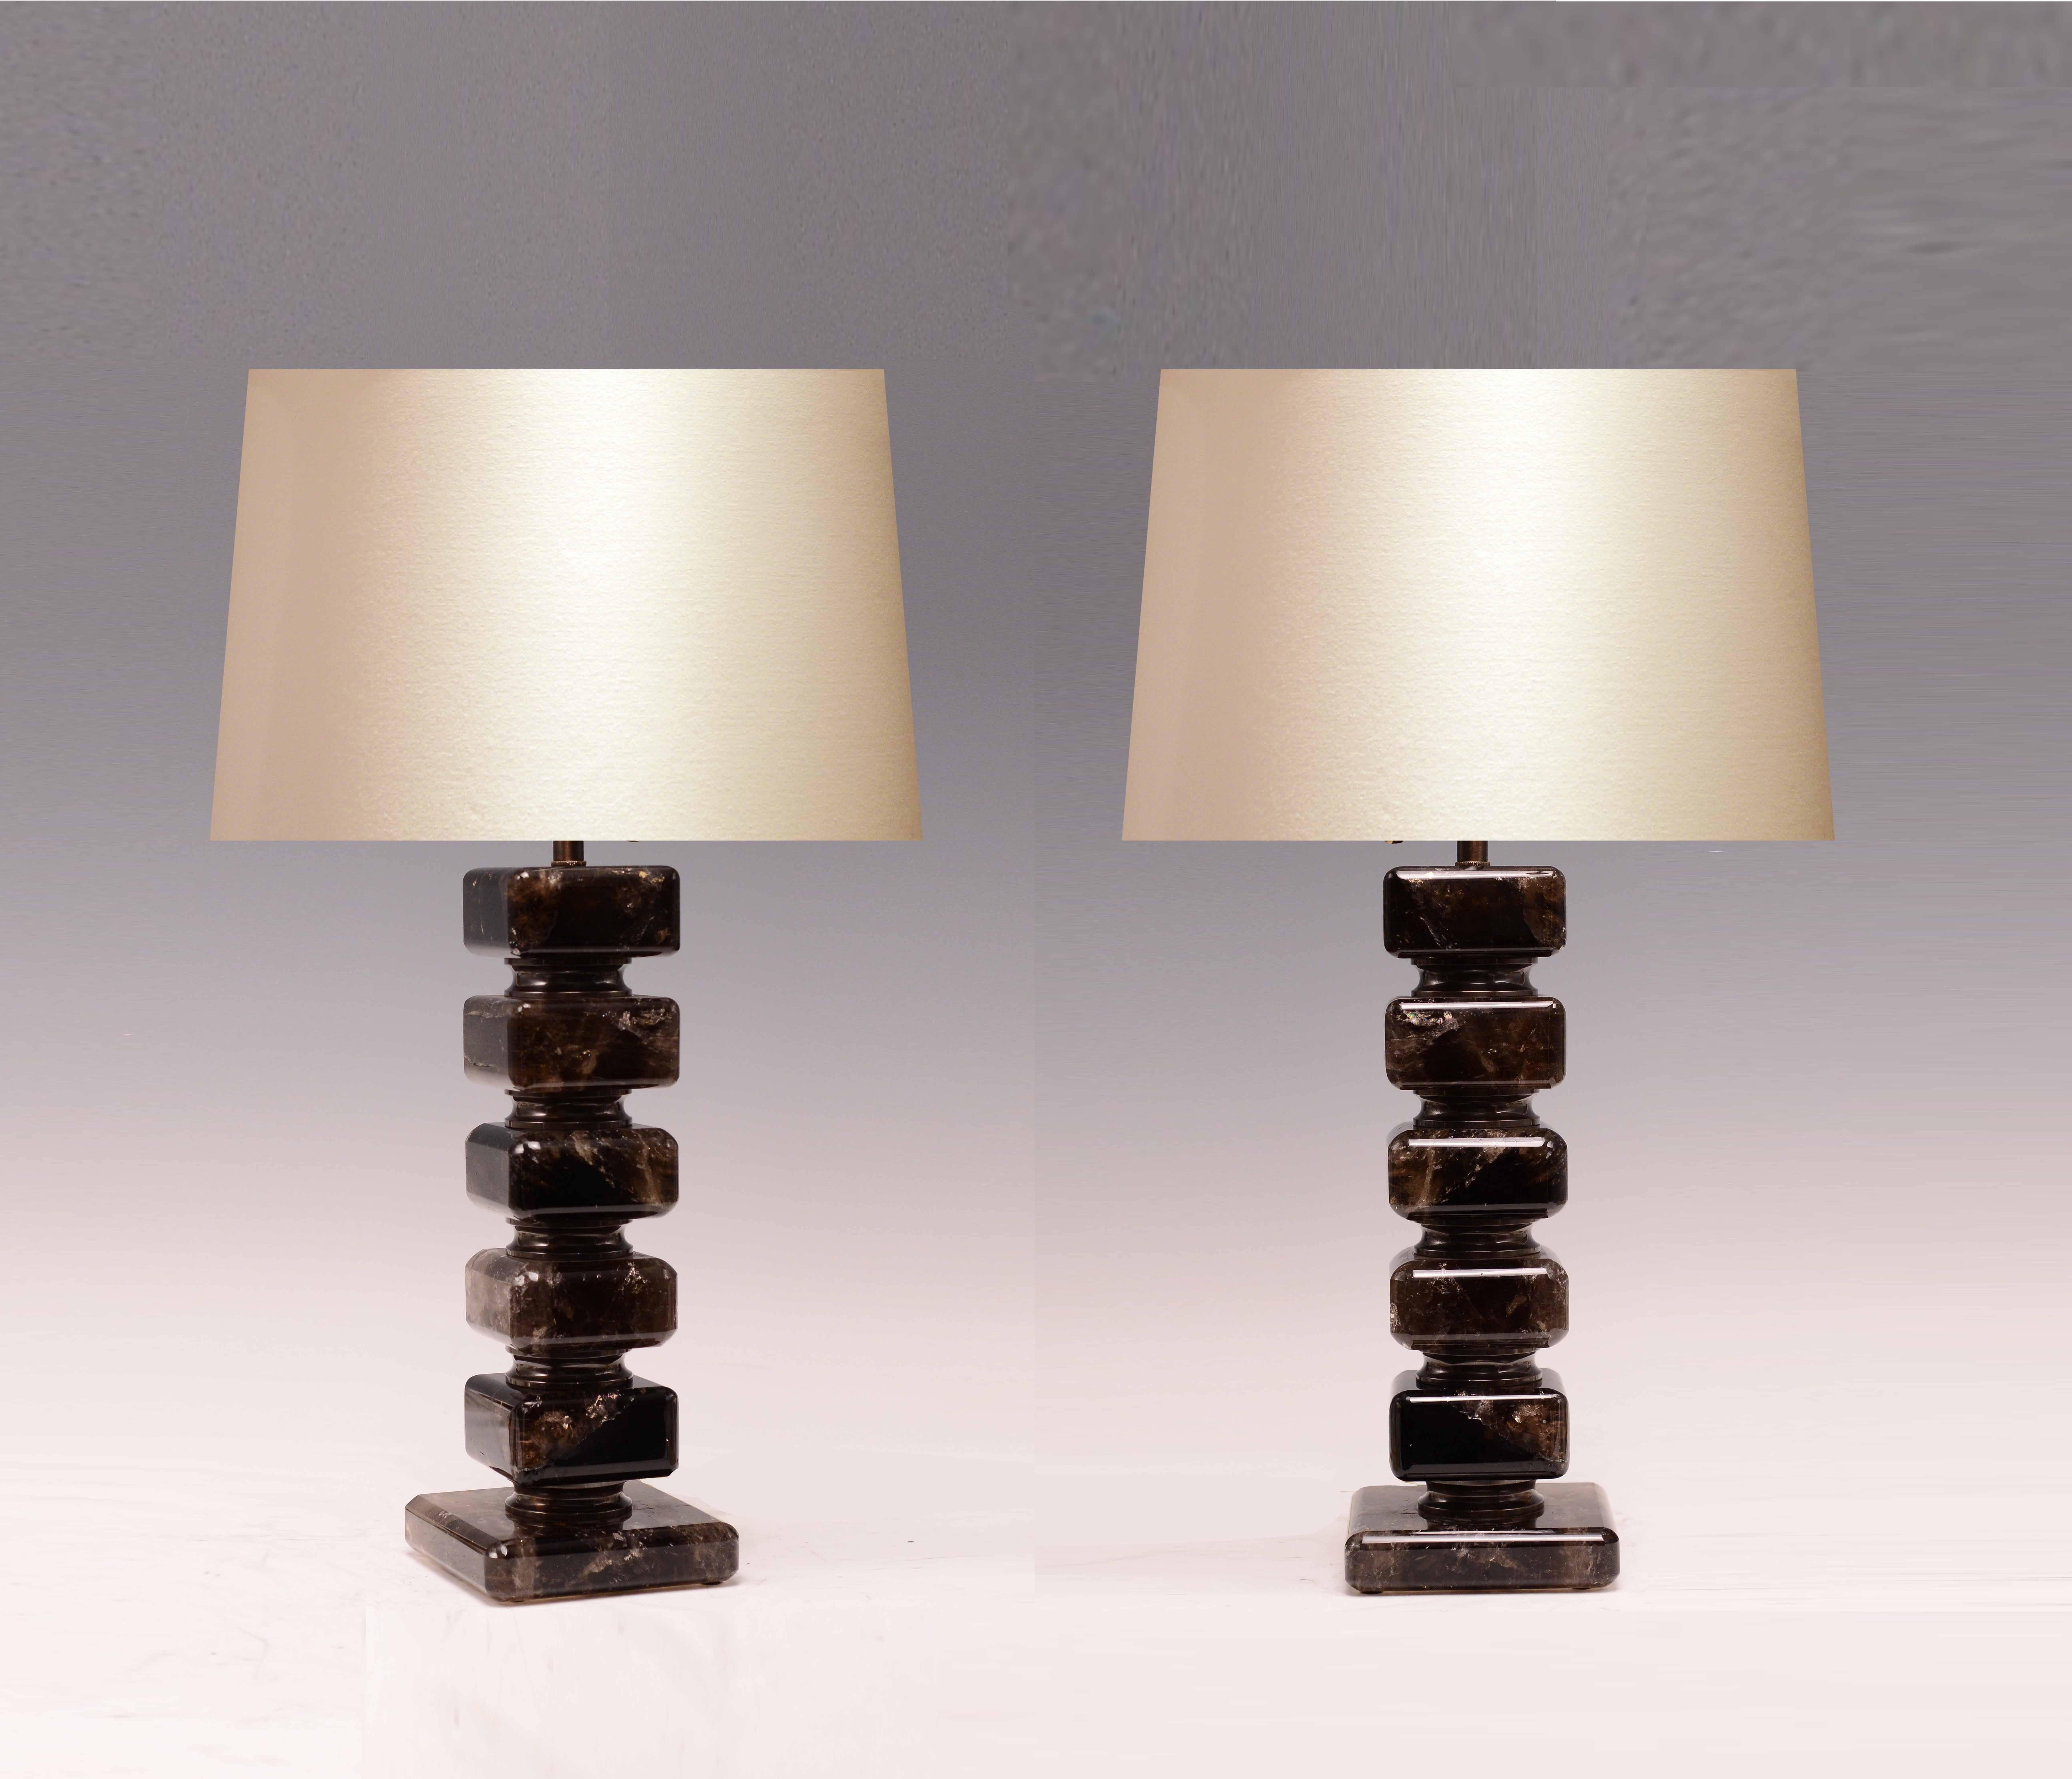 Fine carved cubic form rock crystal table lamps with antique brass insert decoration, created by Phoenix Gallery, NYC.
to the rock crystal: 14 in / H
Total height with shade: 27 in / H
(We don't supply lampshade).
